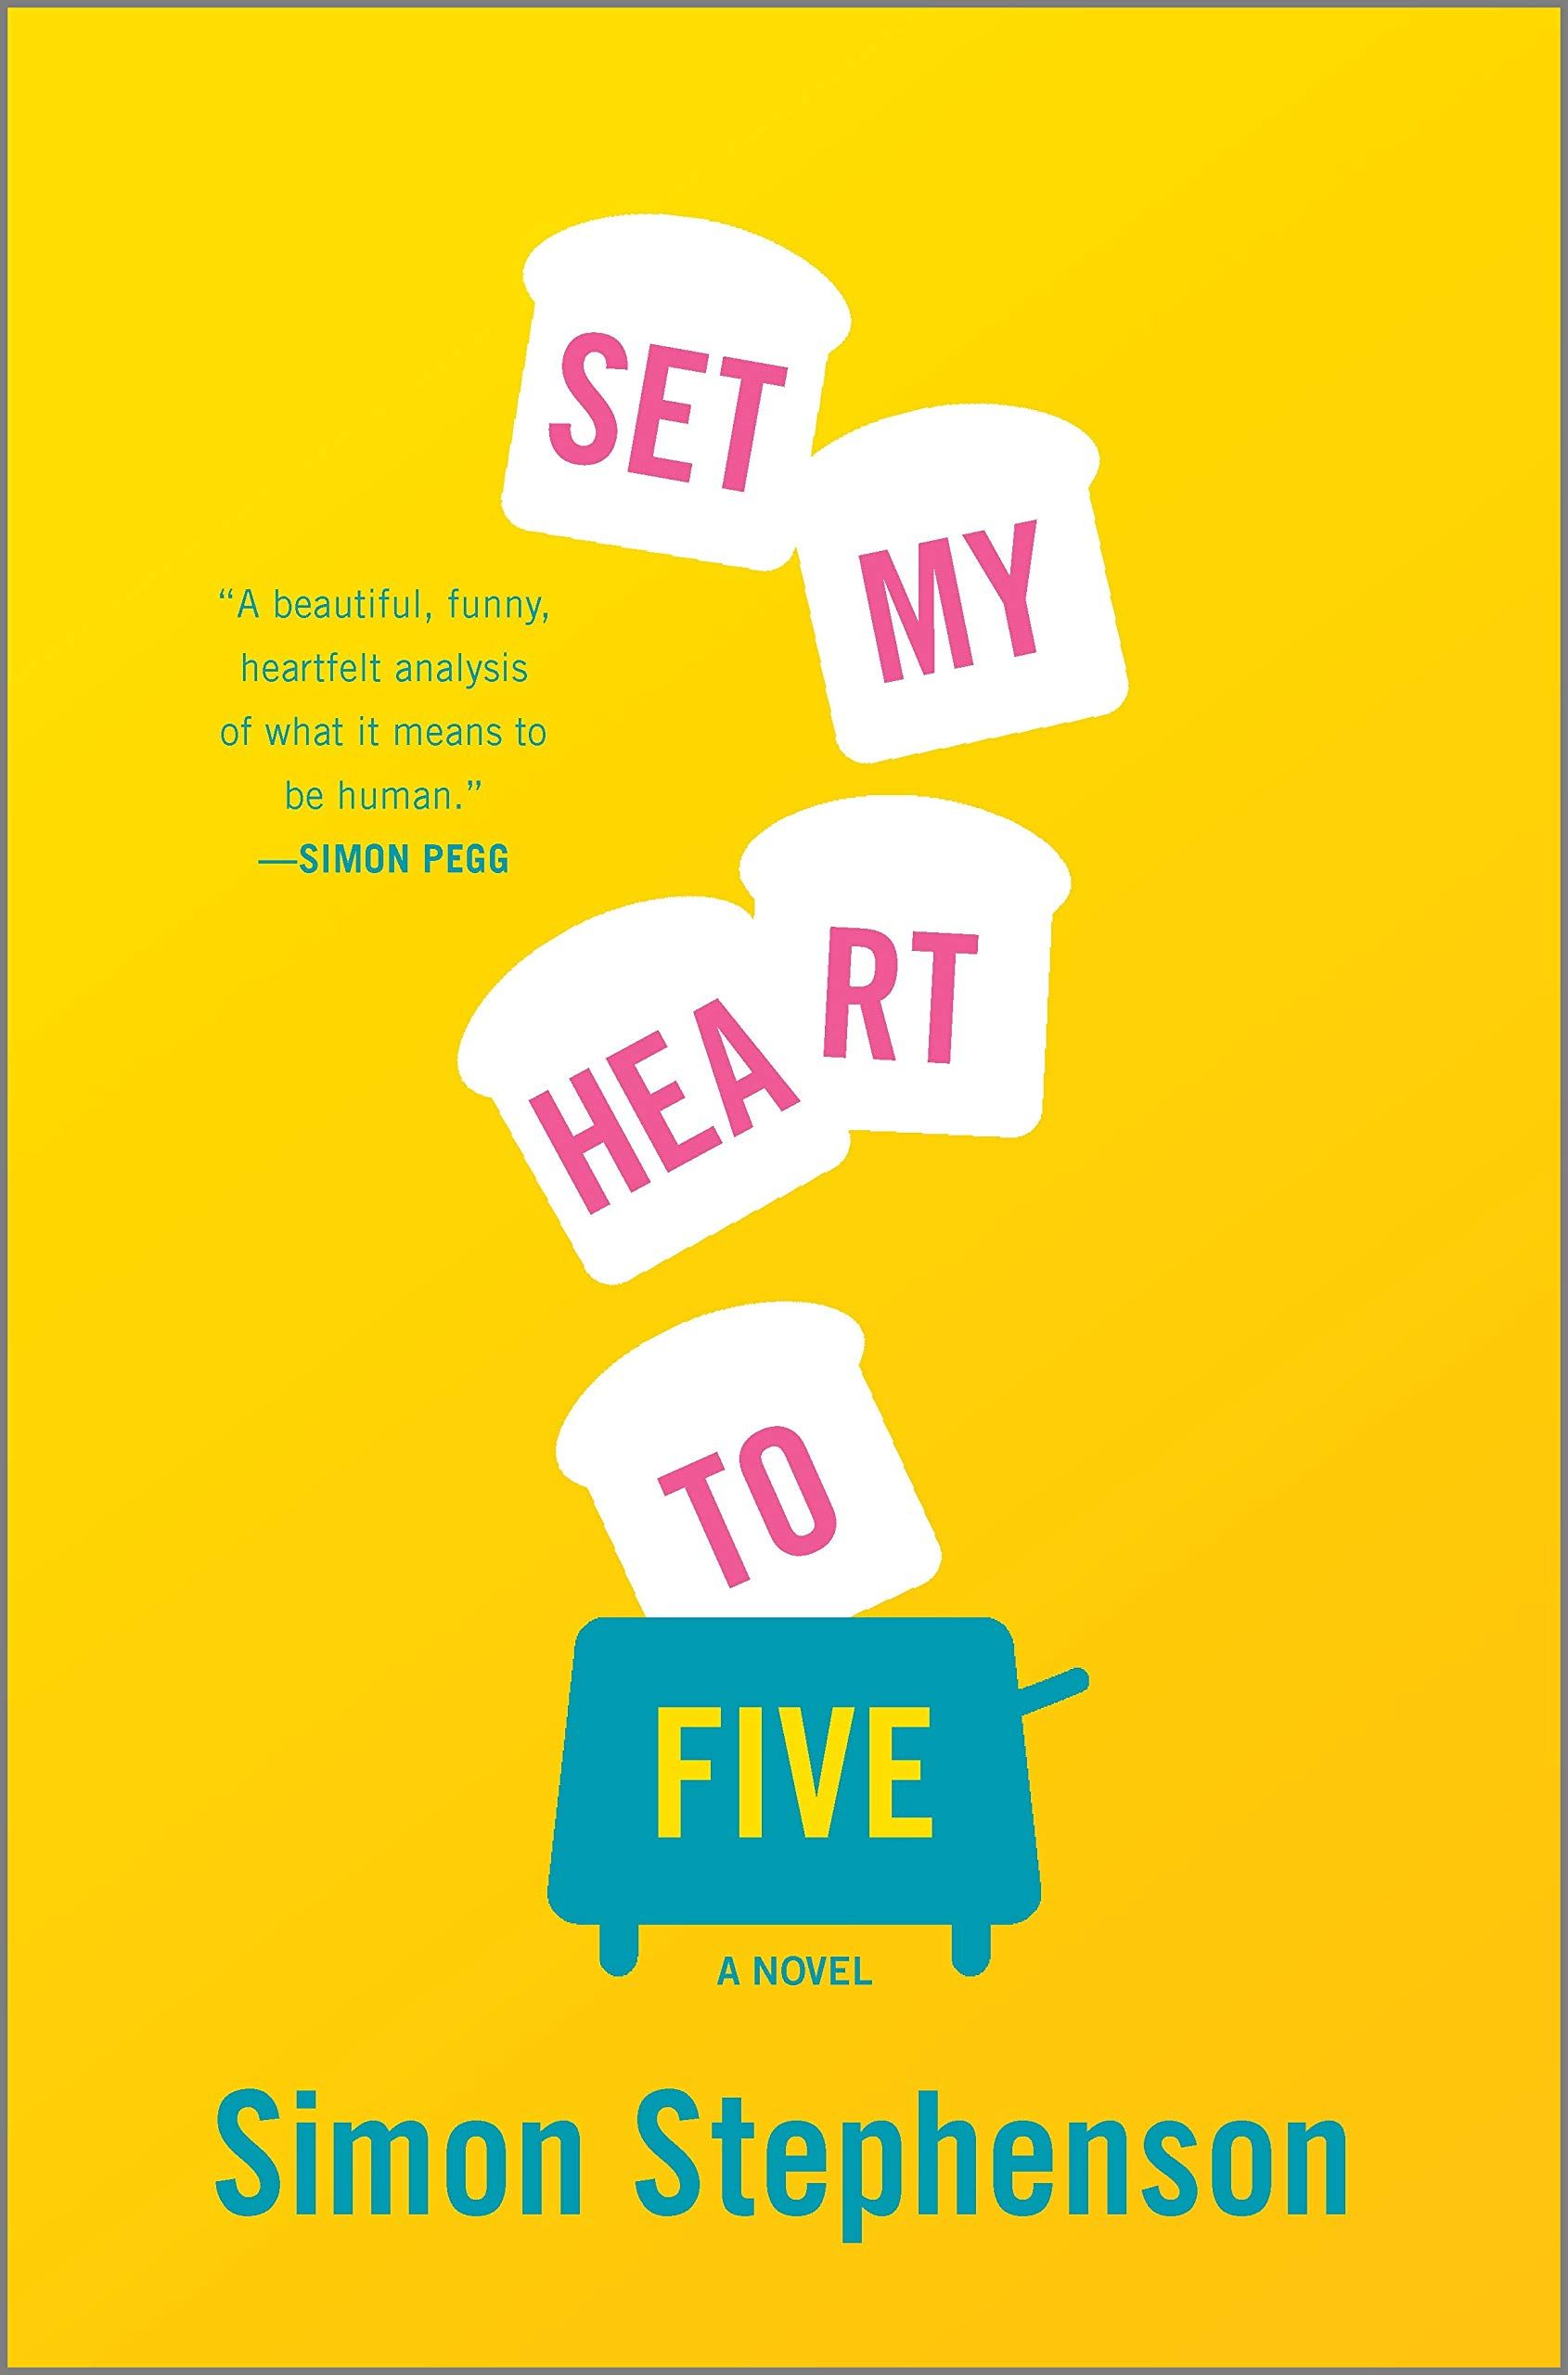 Set My Heart To Five